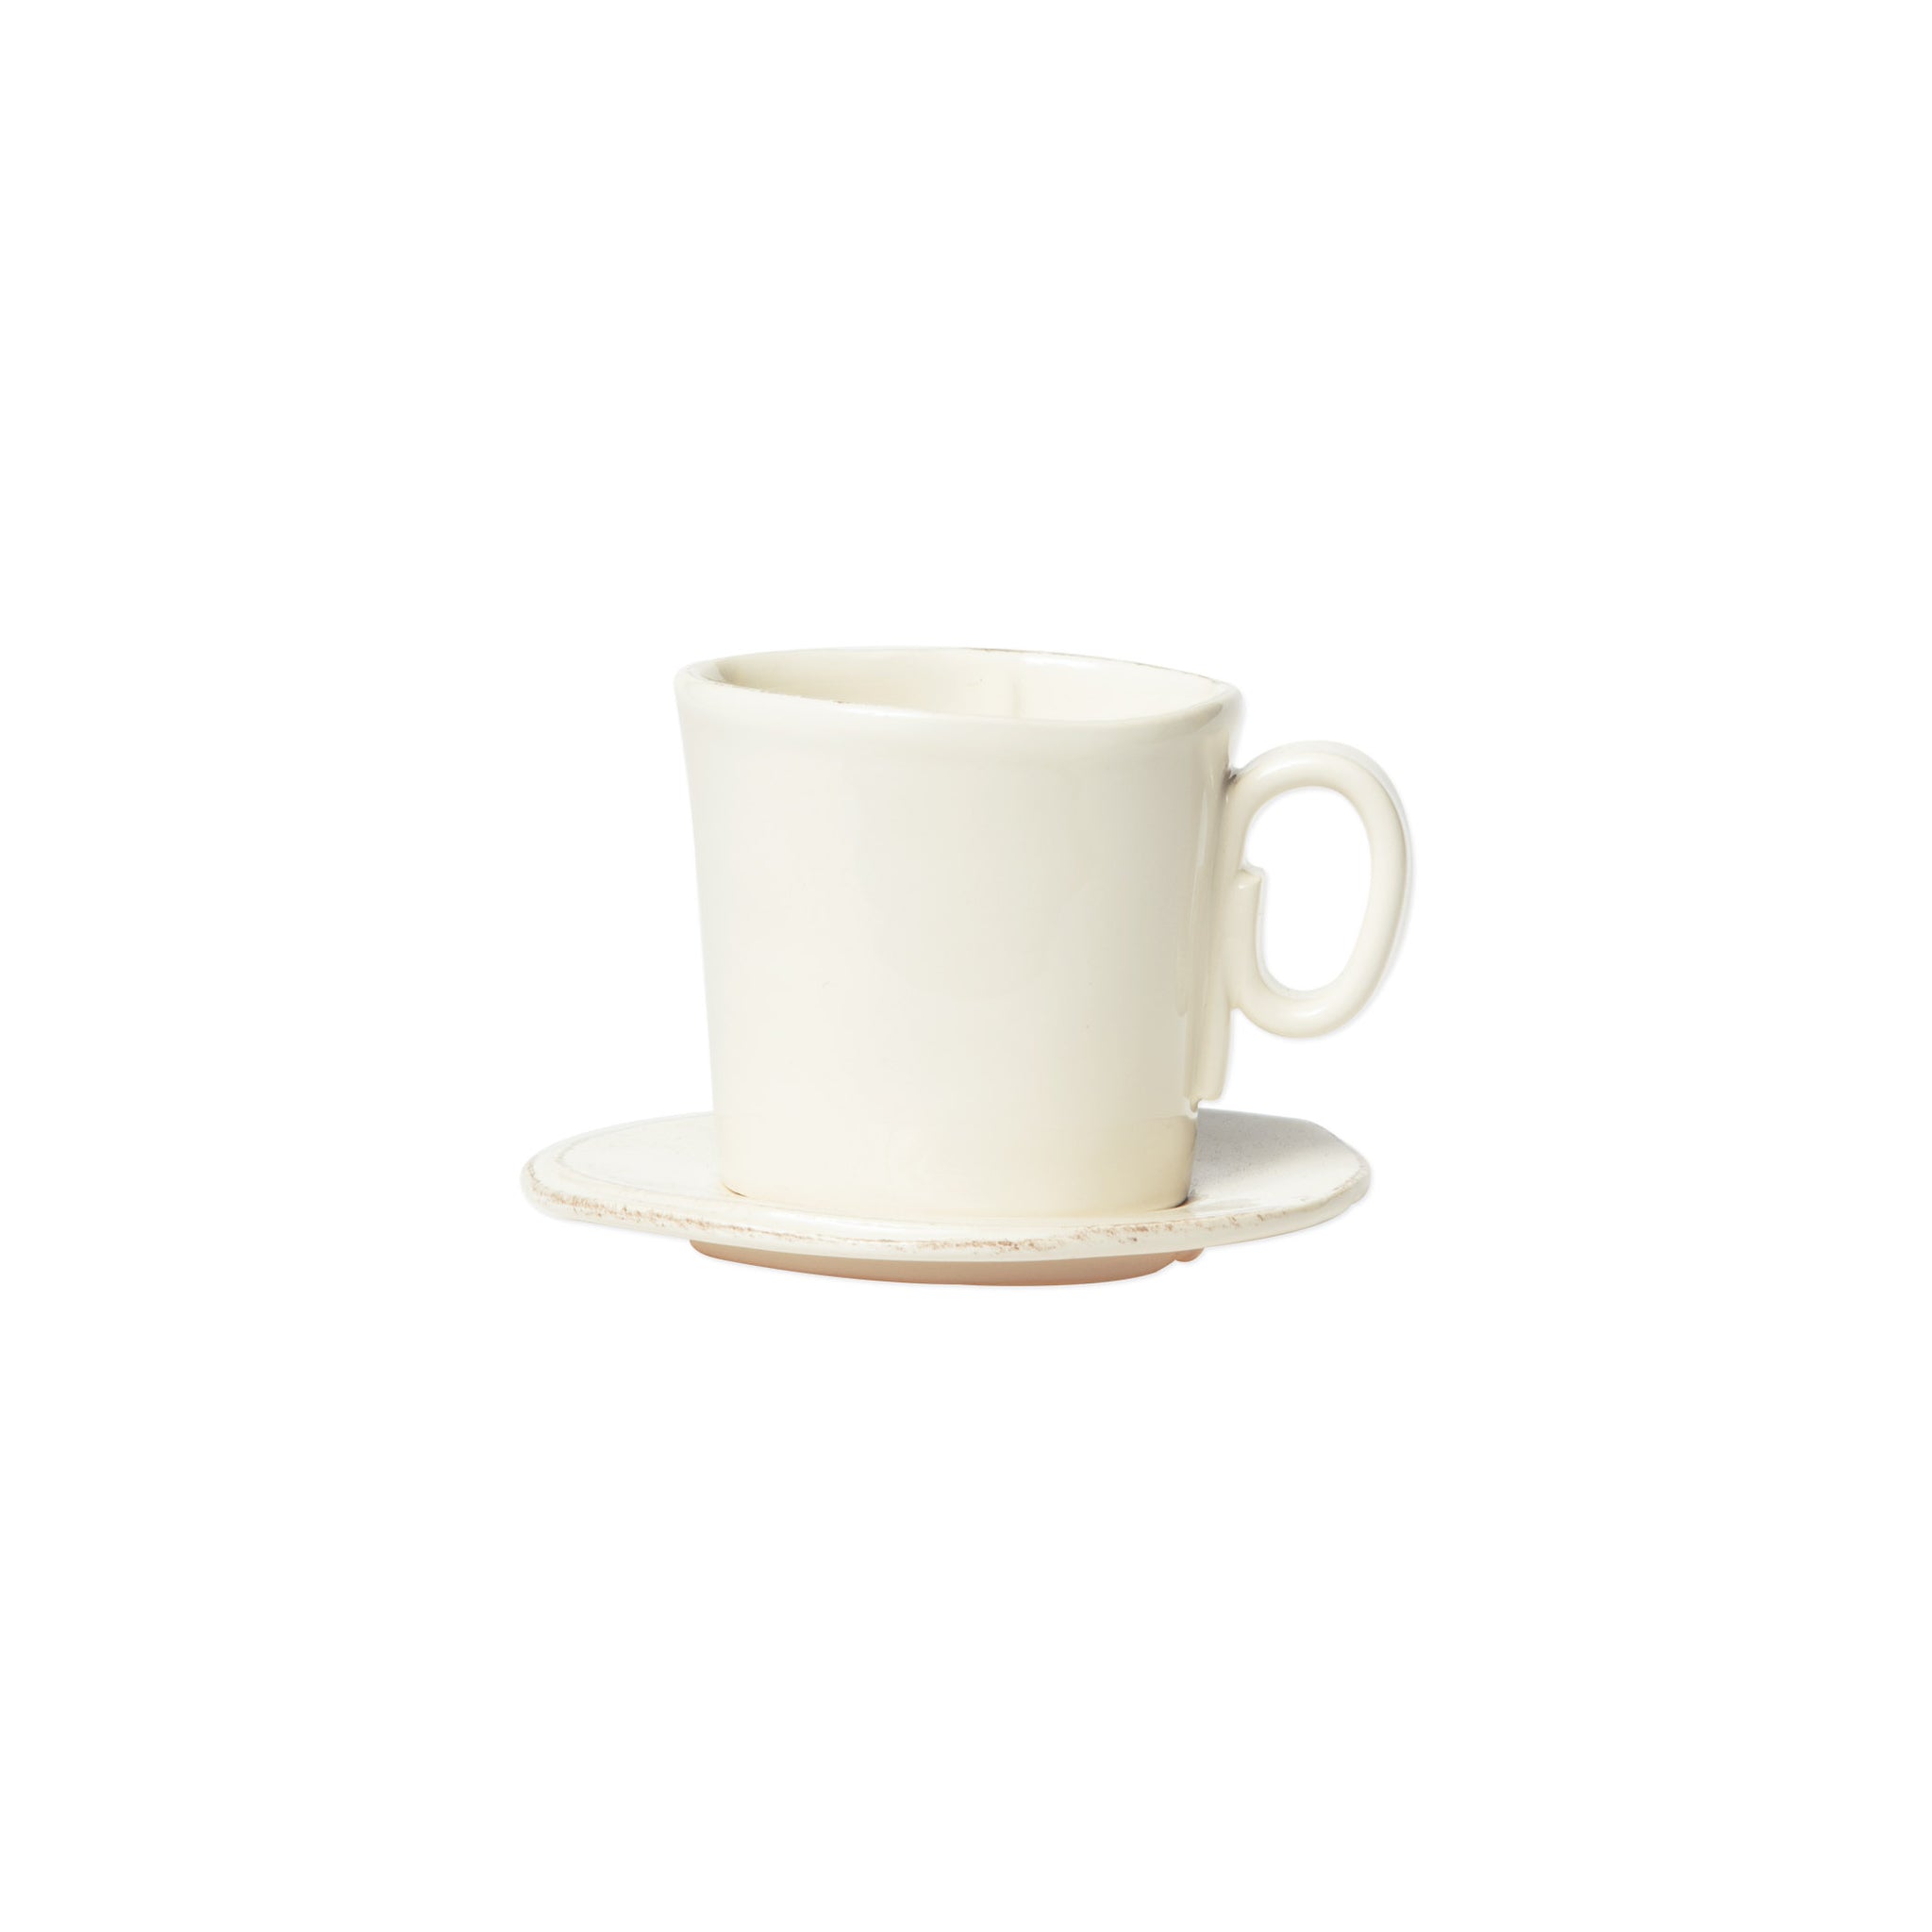 Lastra Espresso Cup and Saucer - Set of 4 - Linen